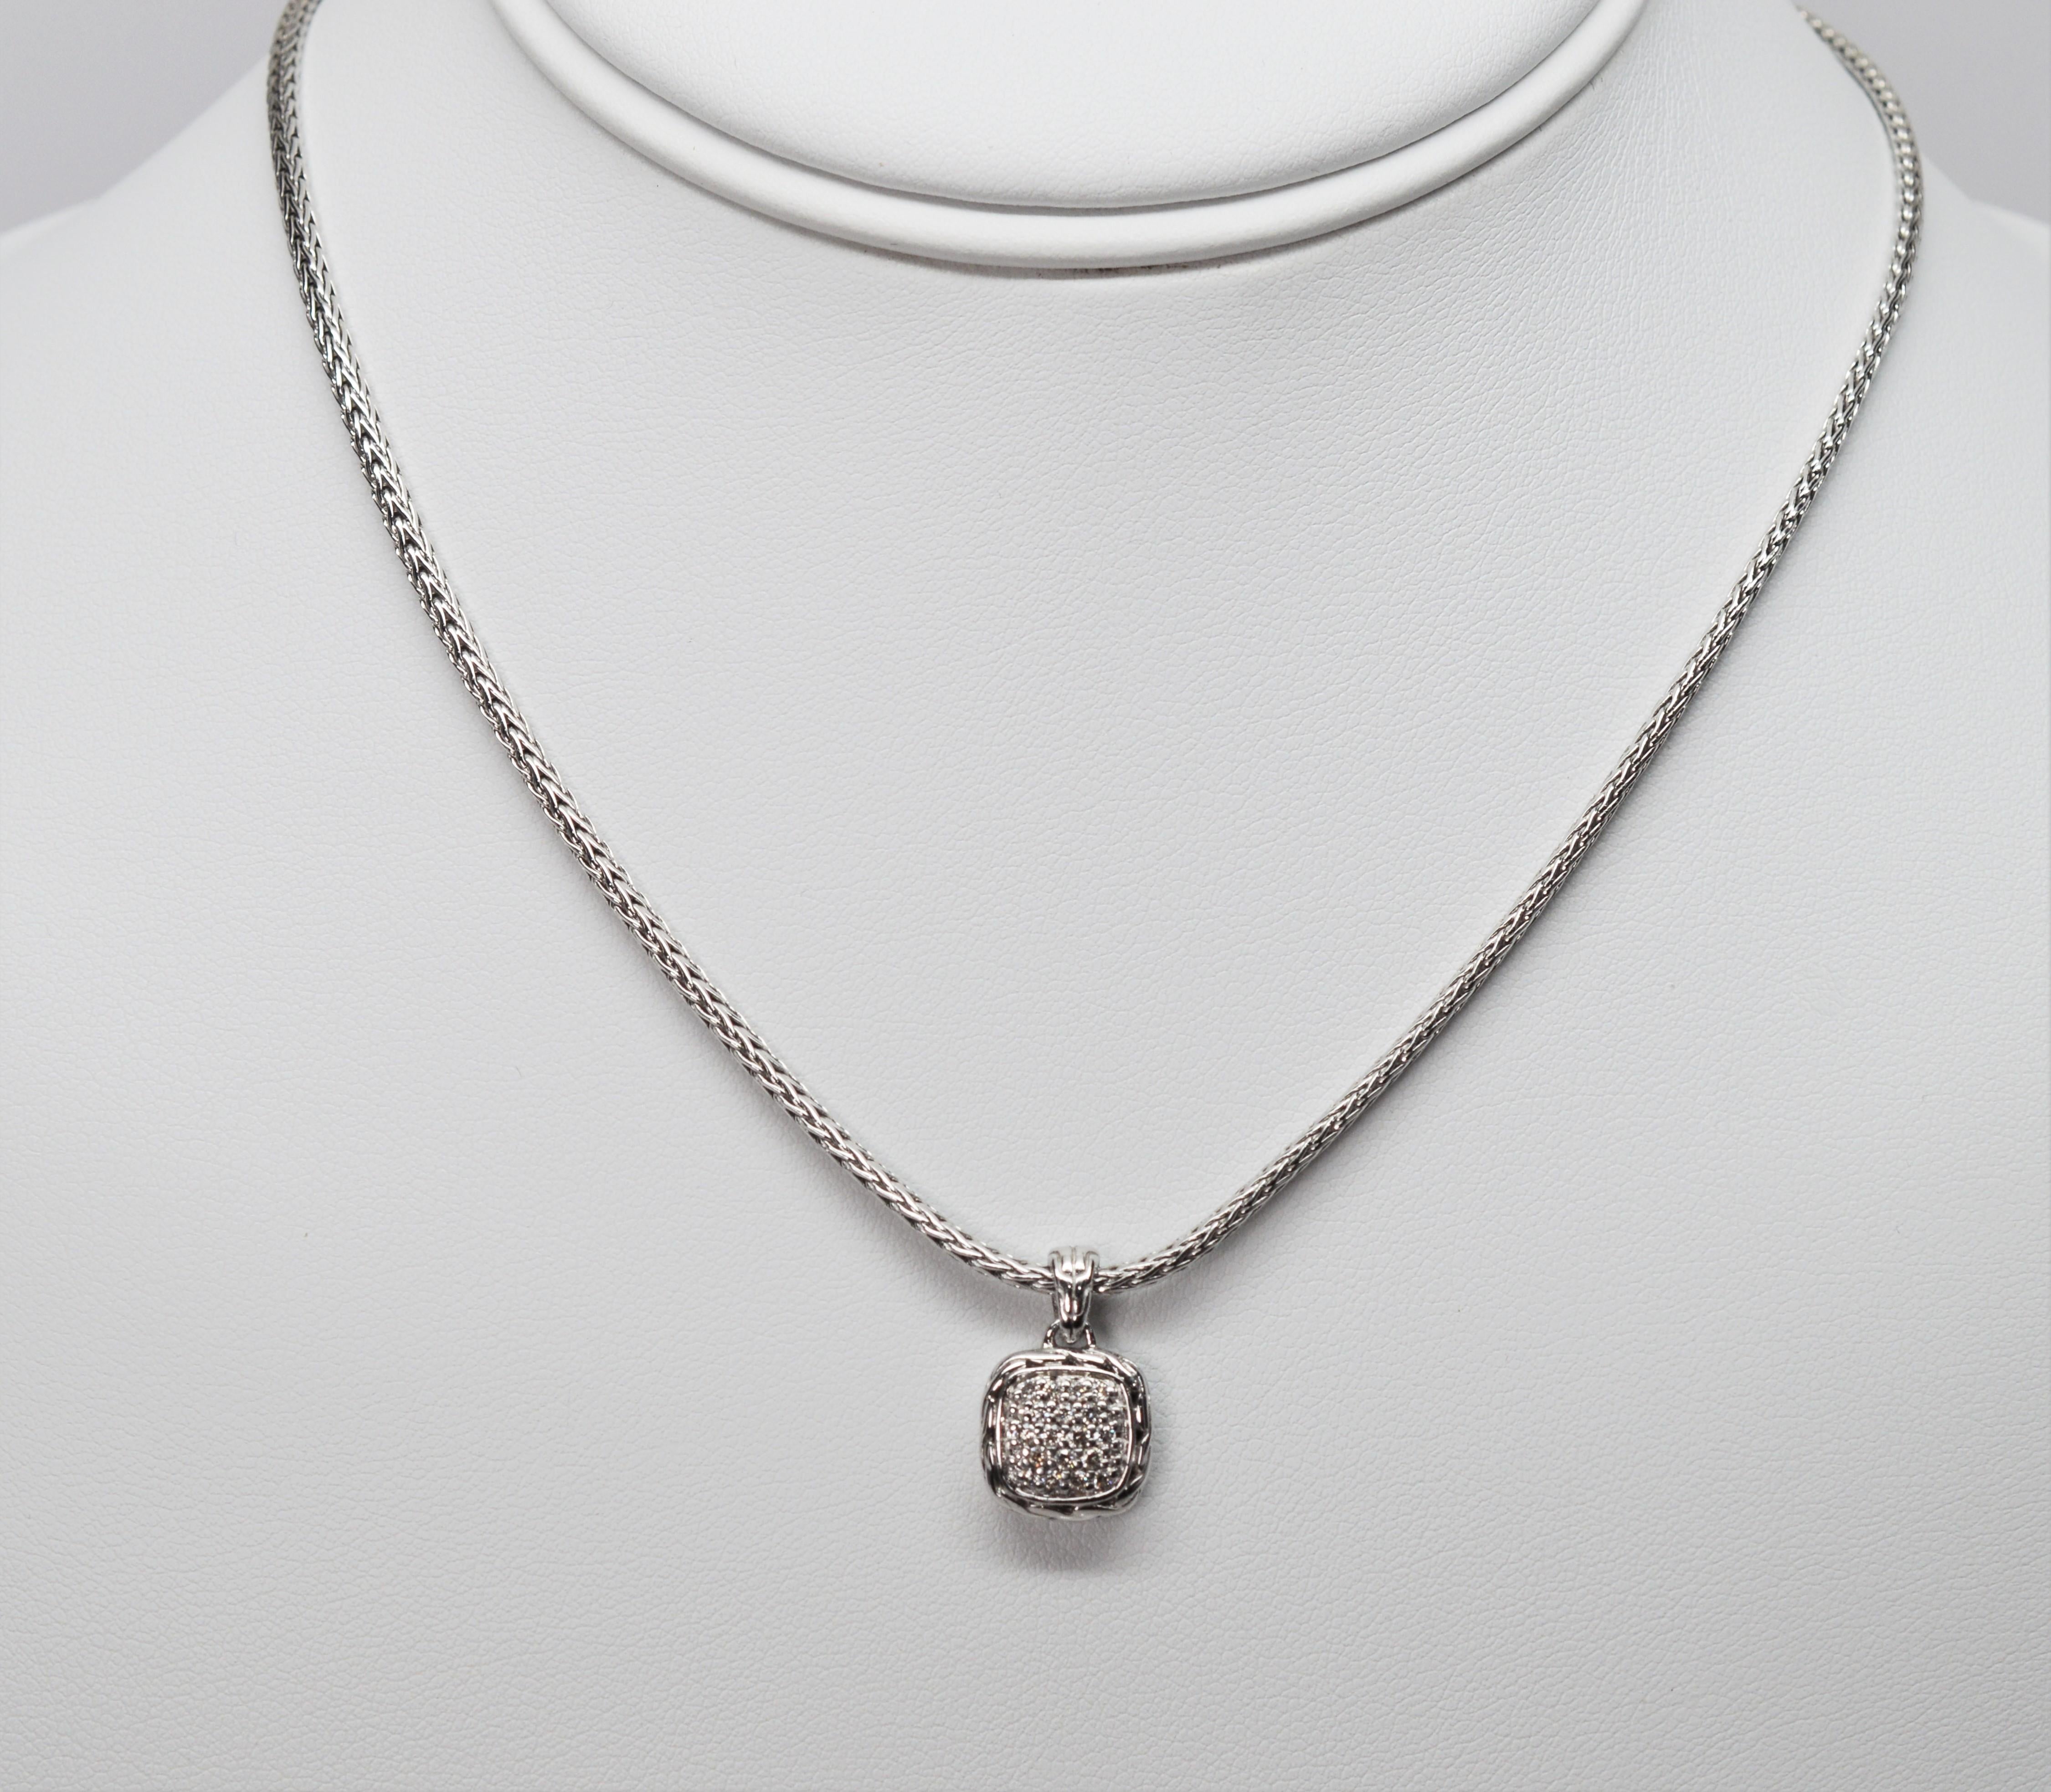 Artisan crafted in sterling silver, with a dramatic woven chain design, this John Hardy classic pendant necklace hosts an eye catching pave white diamond pendant measuring 11 mm x 19.5 mm ( 1/2  x 3/4 inch) including the bale. Finished with a